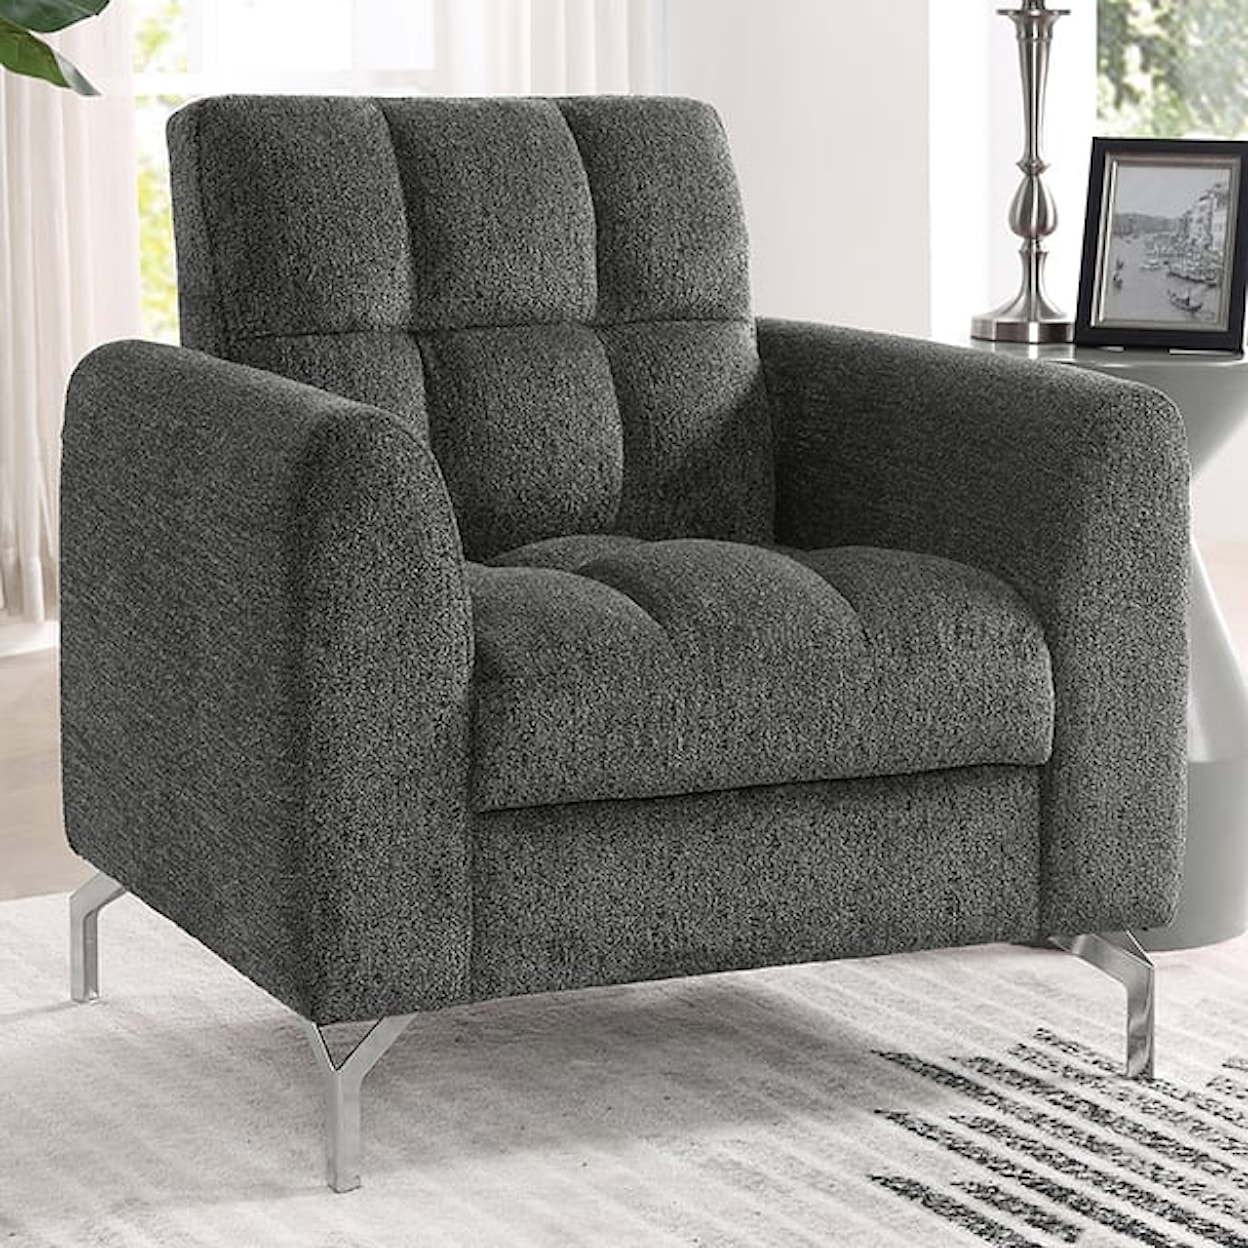 Furniture of America Lupin Upholstered Chaird